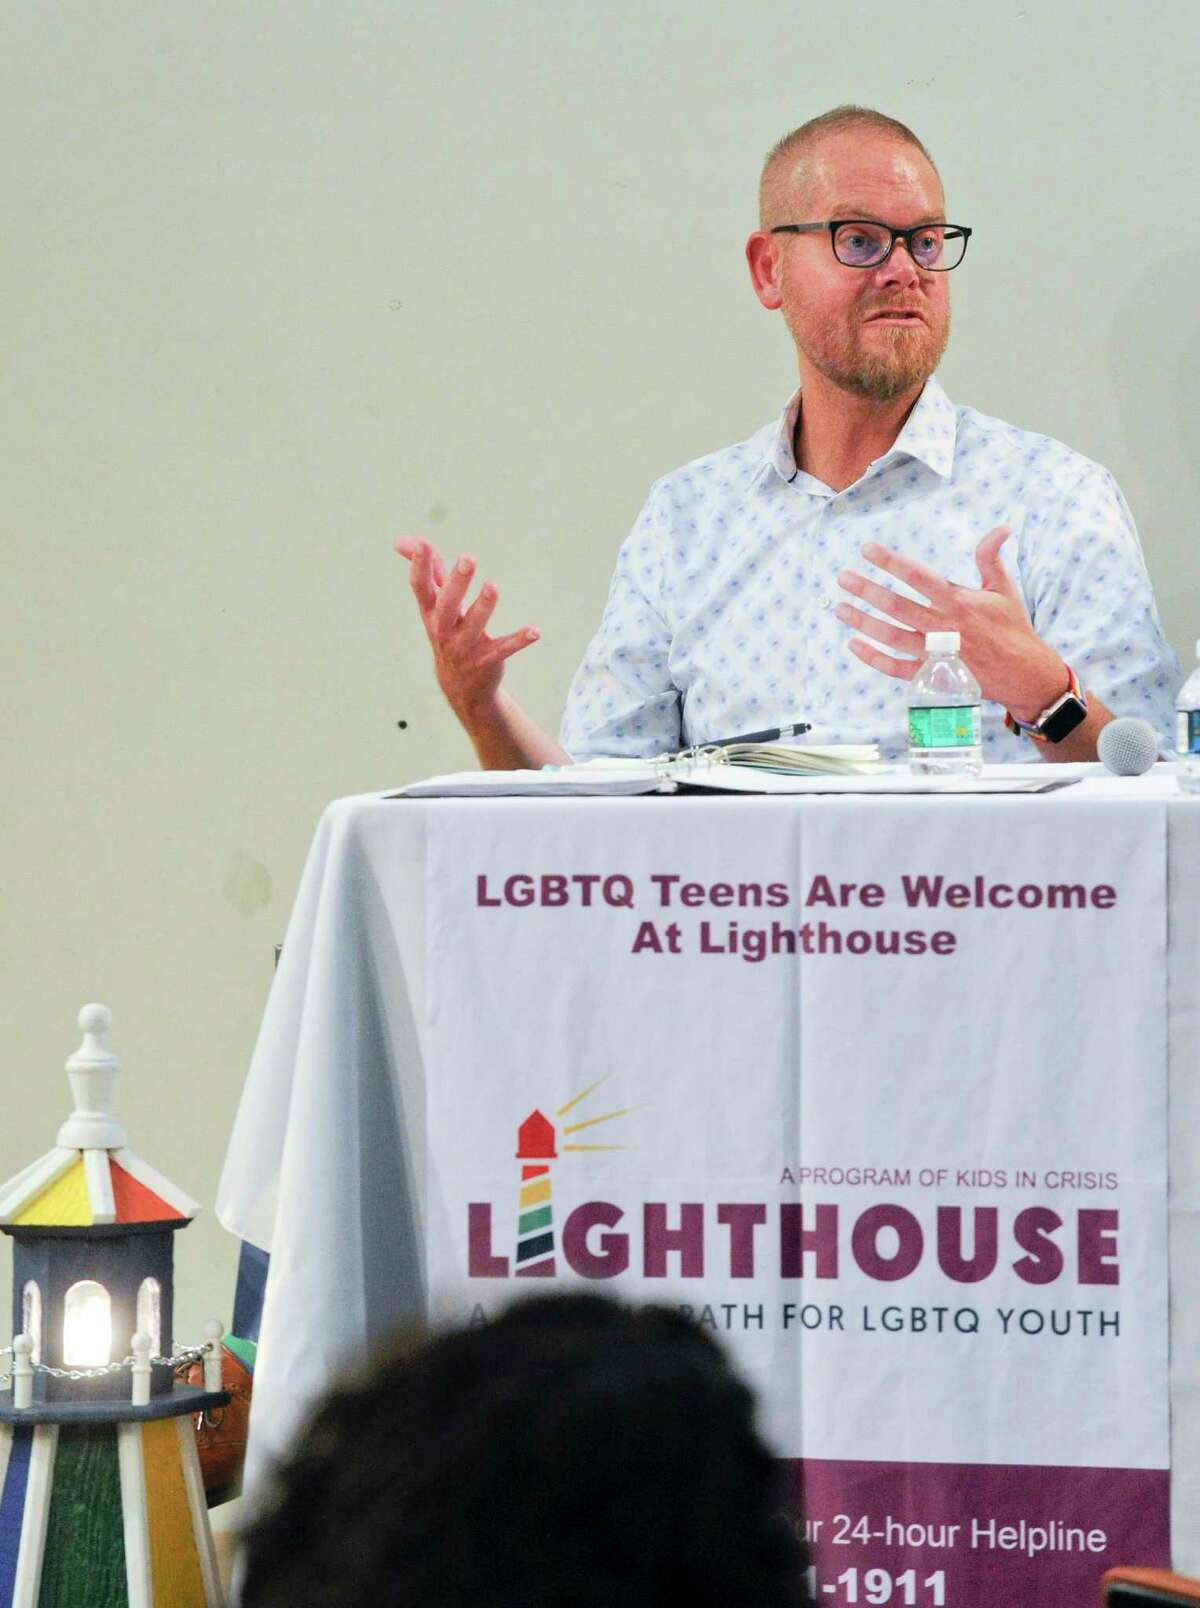 State Representatives Jeff Currey speaks during a Kids In Crisis Ct's Lighthouse forum on LGBTQ issues at the Ferguson Library Harry Bennett Branch on Sept. 18, 2019 in Stamford, Connecticut. Currey was joined by State Representatives Matt Blumenthal and Stamford Board of Education President Andy George, who answered a wide variety of questions concerning LGBTQ students.